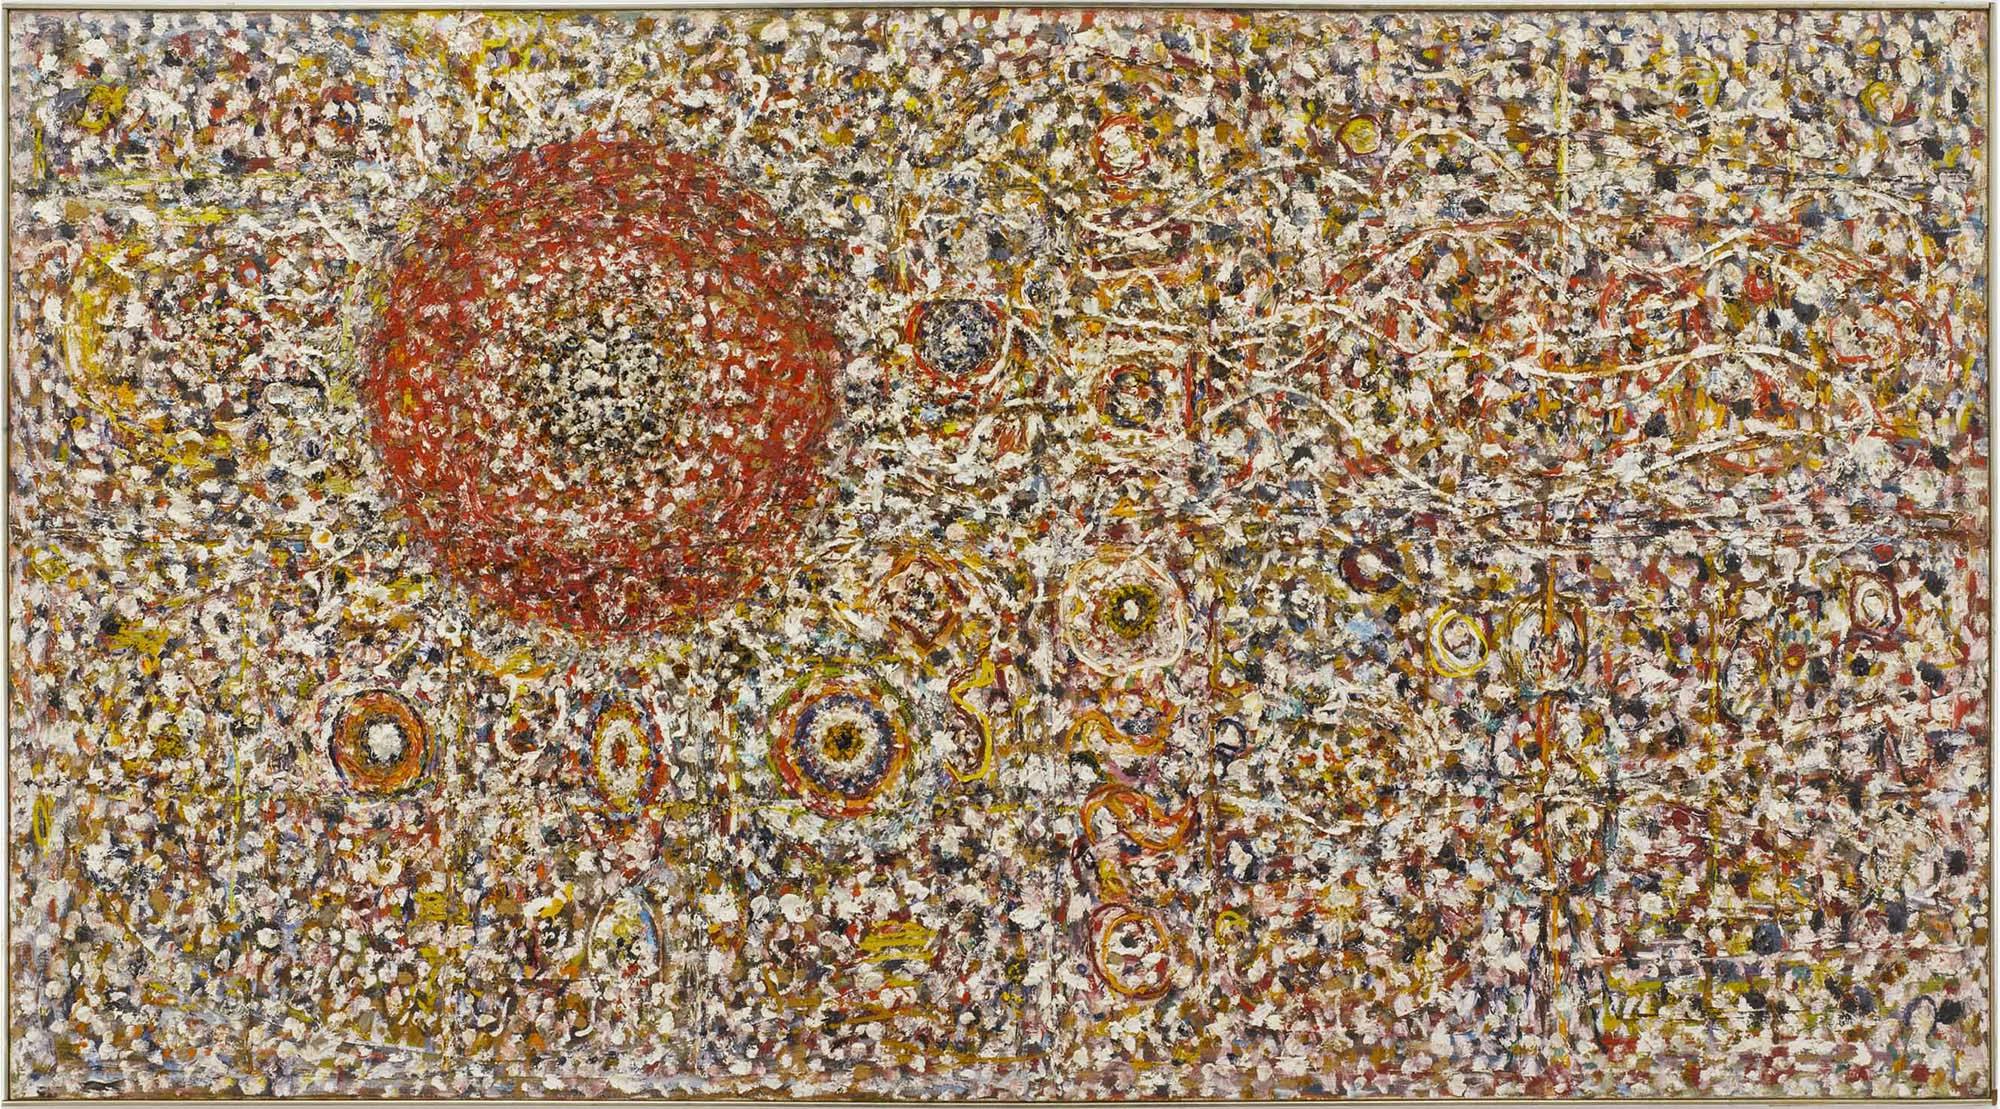 From the Flaming Suns
1960–64
Oil on linen
66 x 96 in. (167.6 x 243.8 cm)
 – The Richard Pousette-Dart Foundation